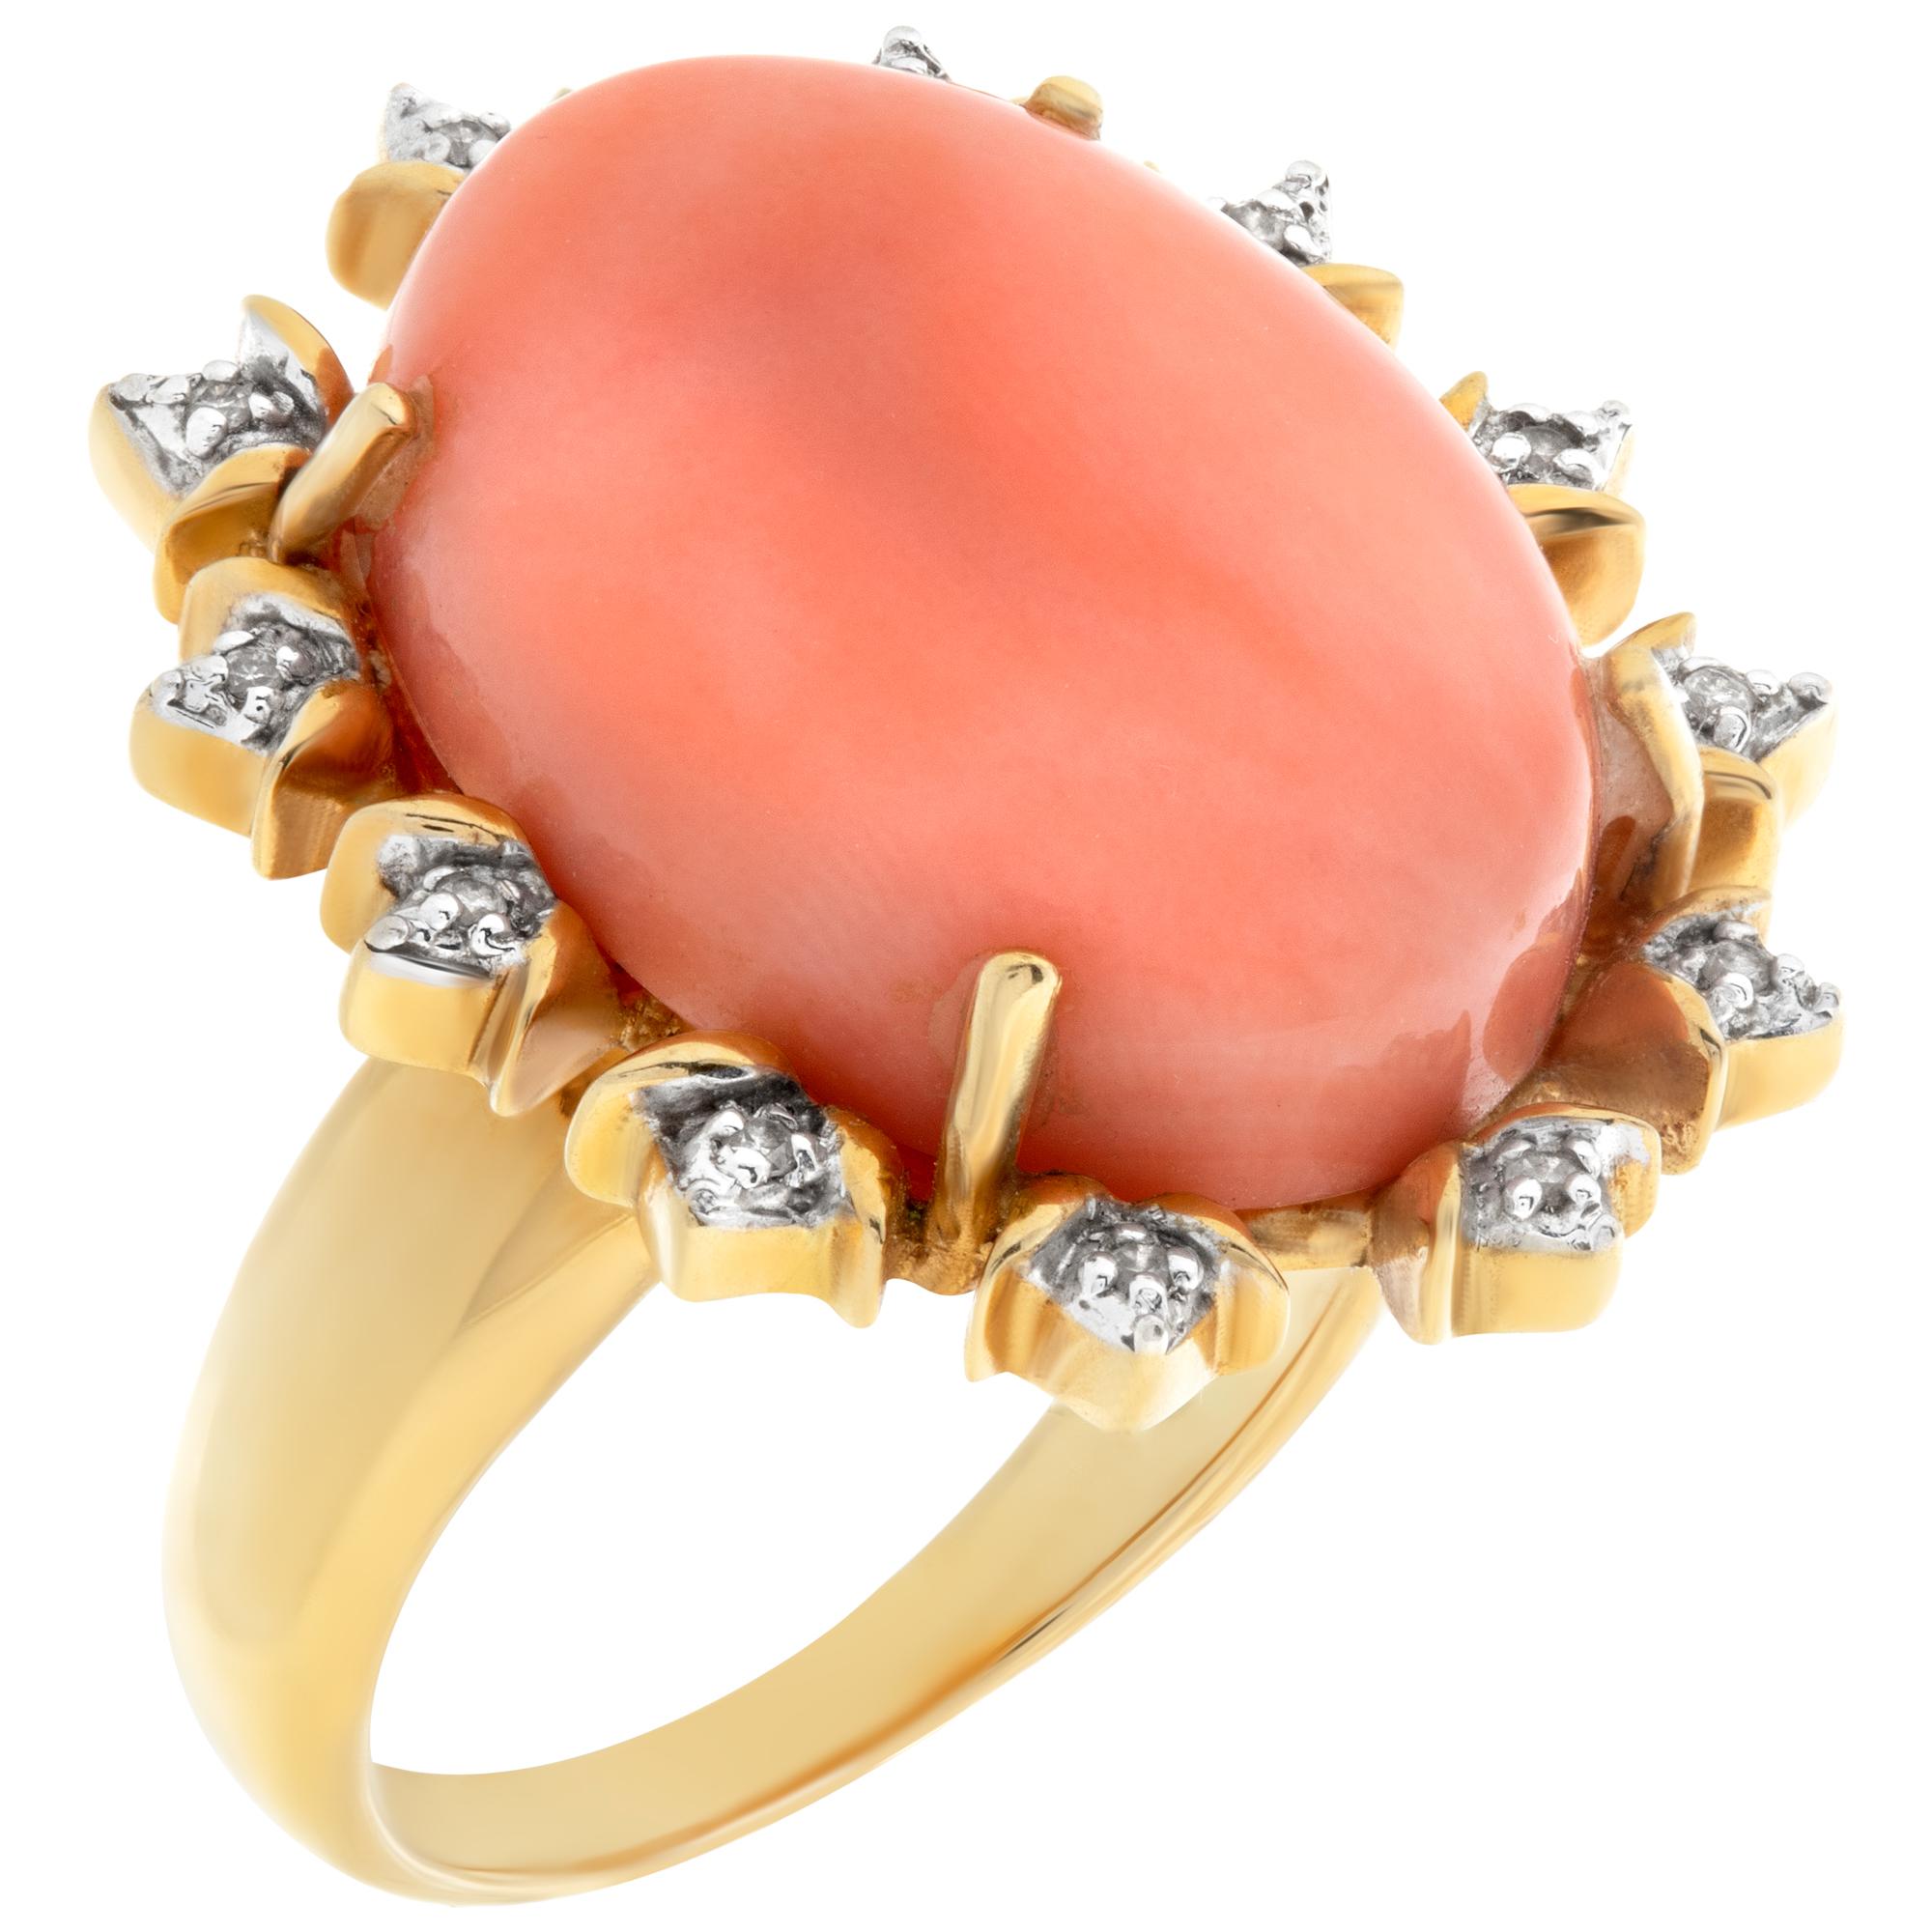 Peachy Keen Coral Ring in 18k Yellow Gold with Diamond Accent Frame In Excellent Condition For Sale In Surfside, FL